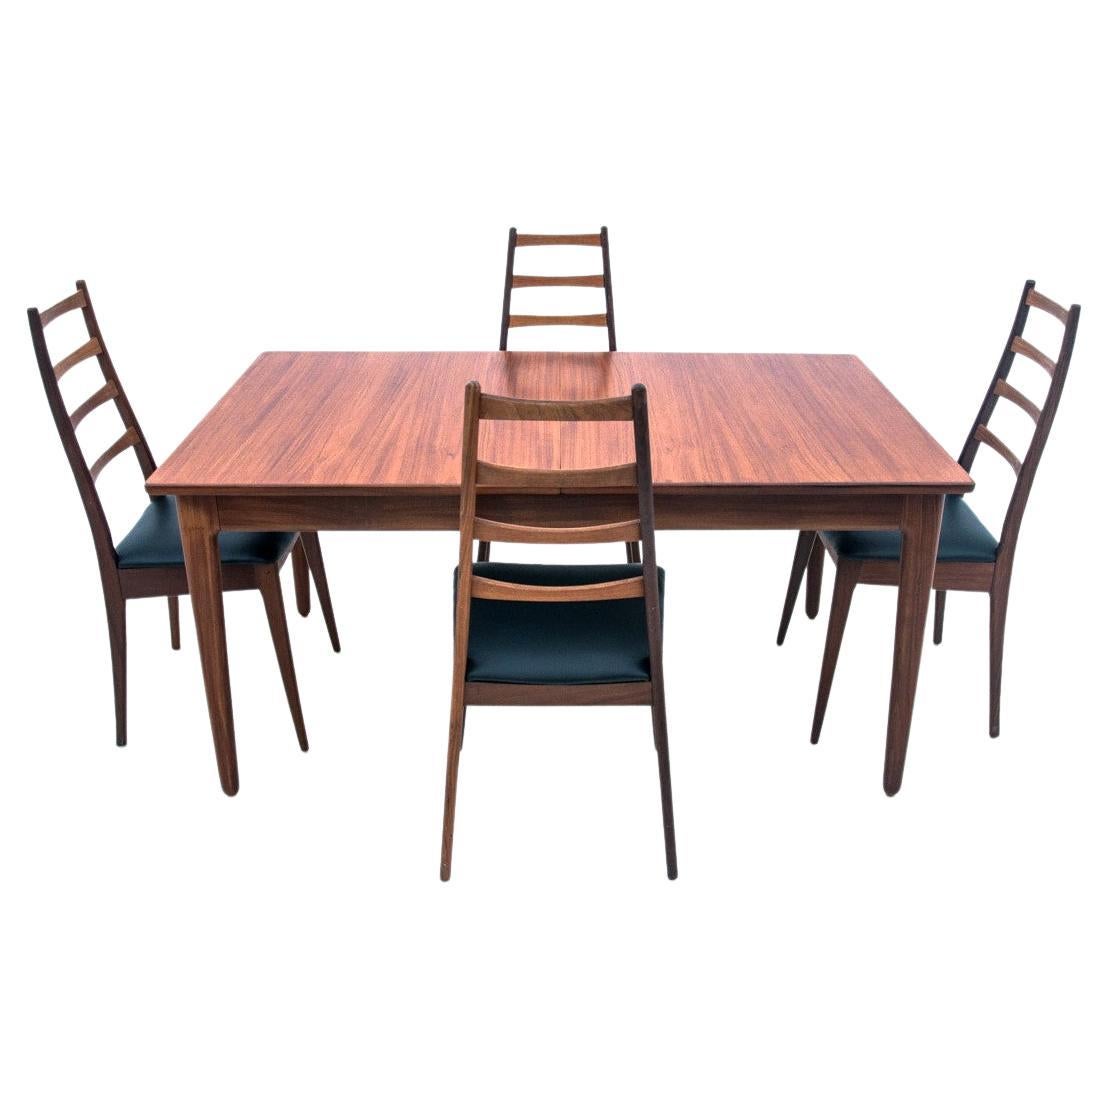 Teak Table with Chairs, Denmark, 1960s